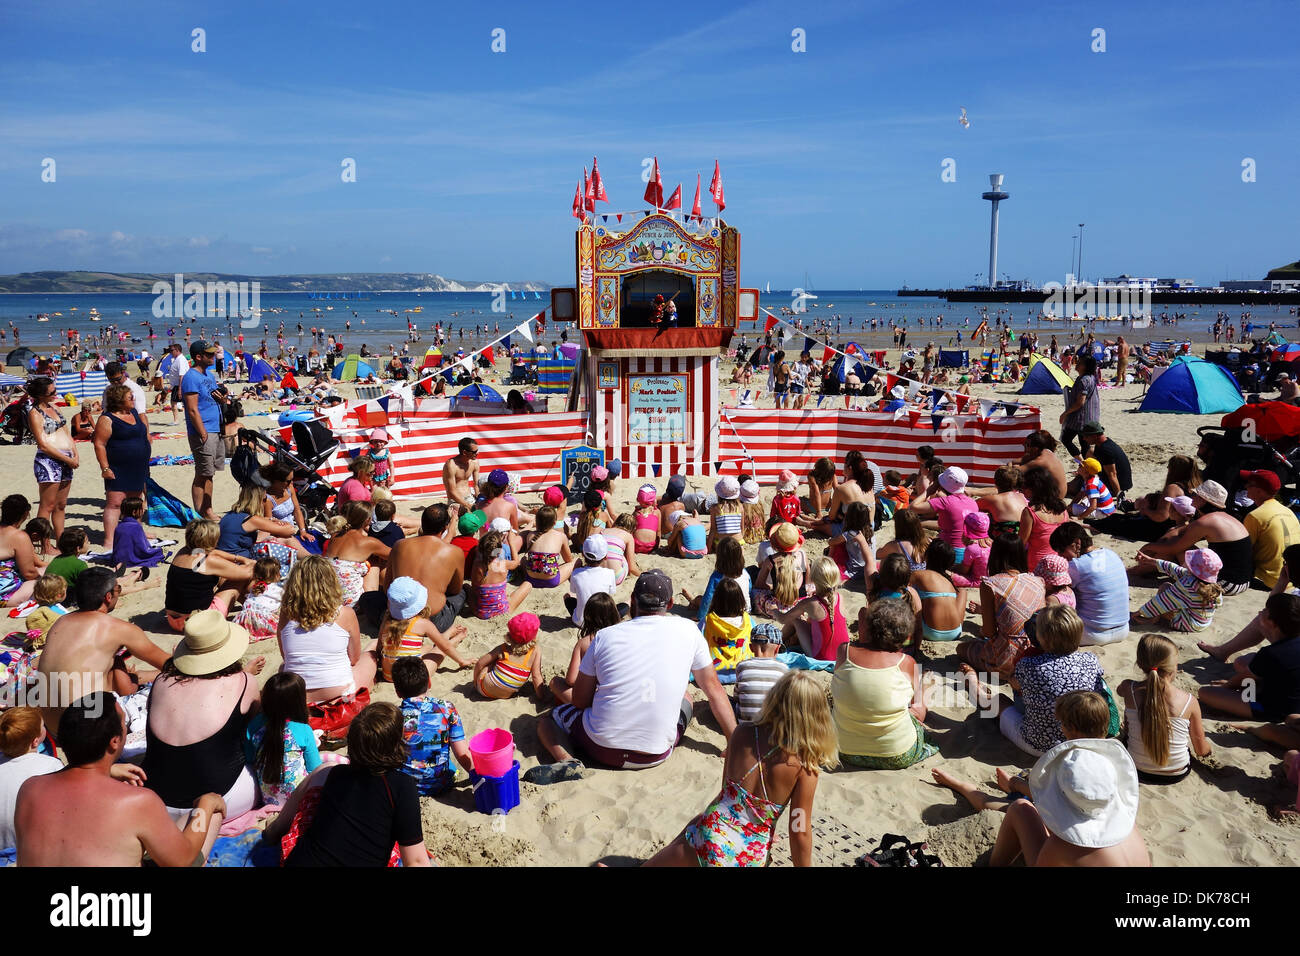 Punch and Judy show am Strand von Weymouth in Dorset England UK, traditionelle Punch and Judy show, UK Stockfoto